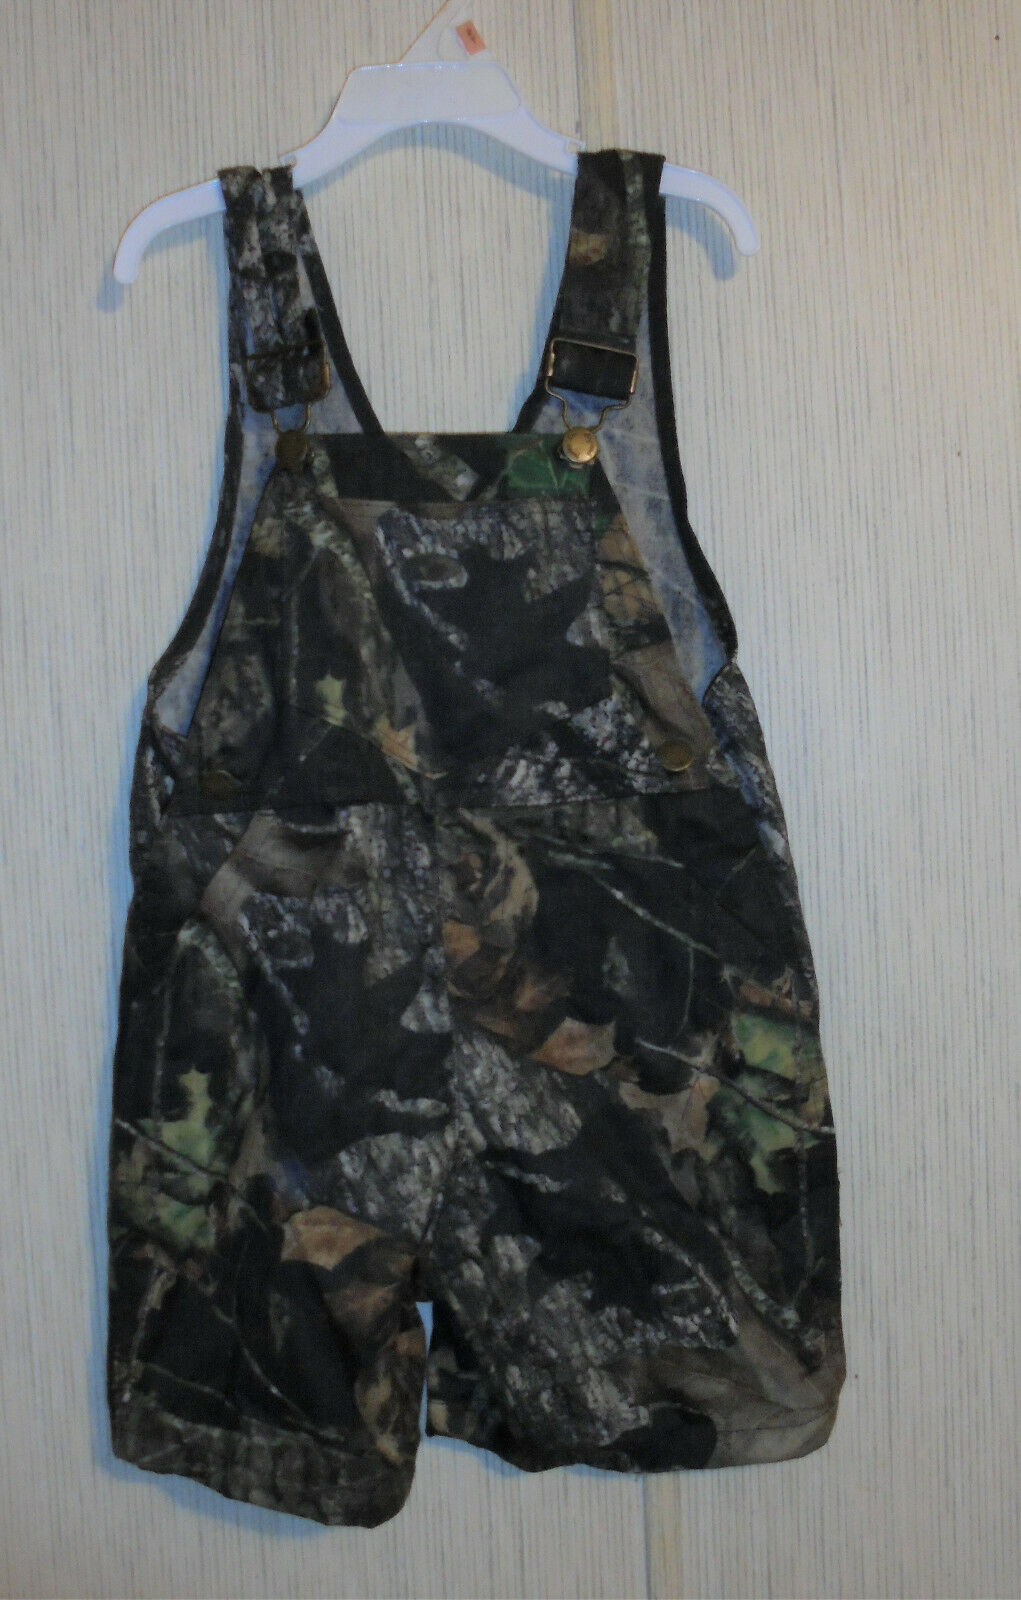 Nwt Toddlers Realtree Camo Overall Shorts 4t Lee Originals